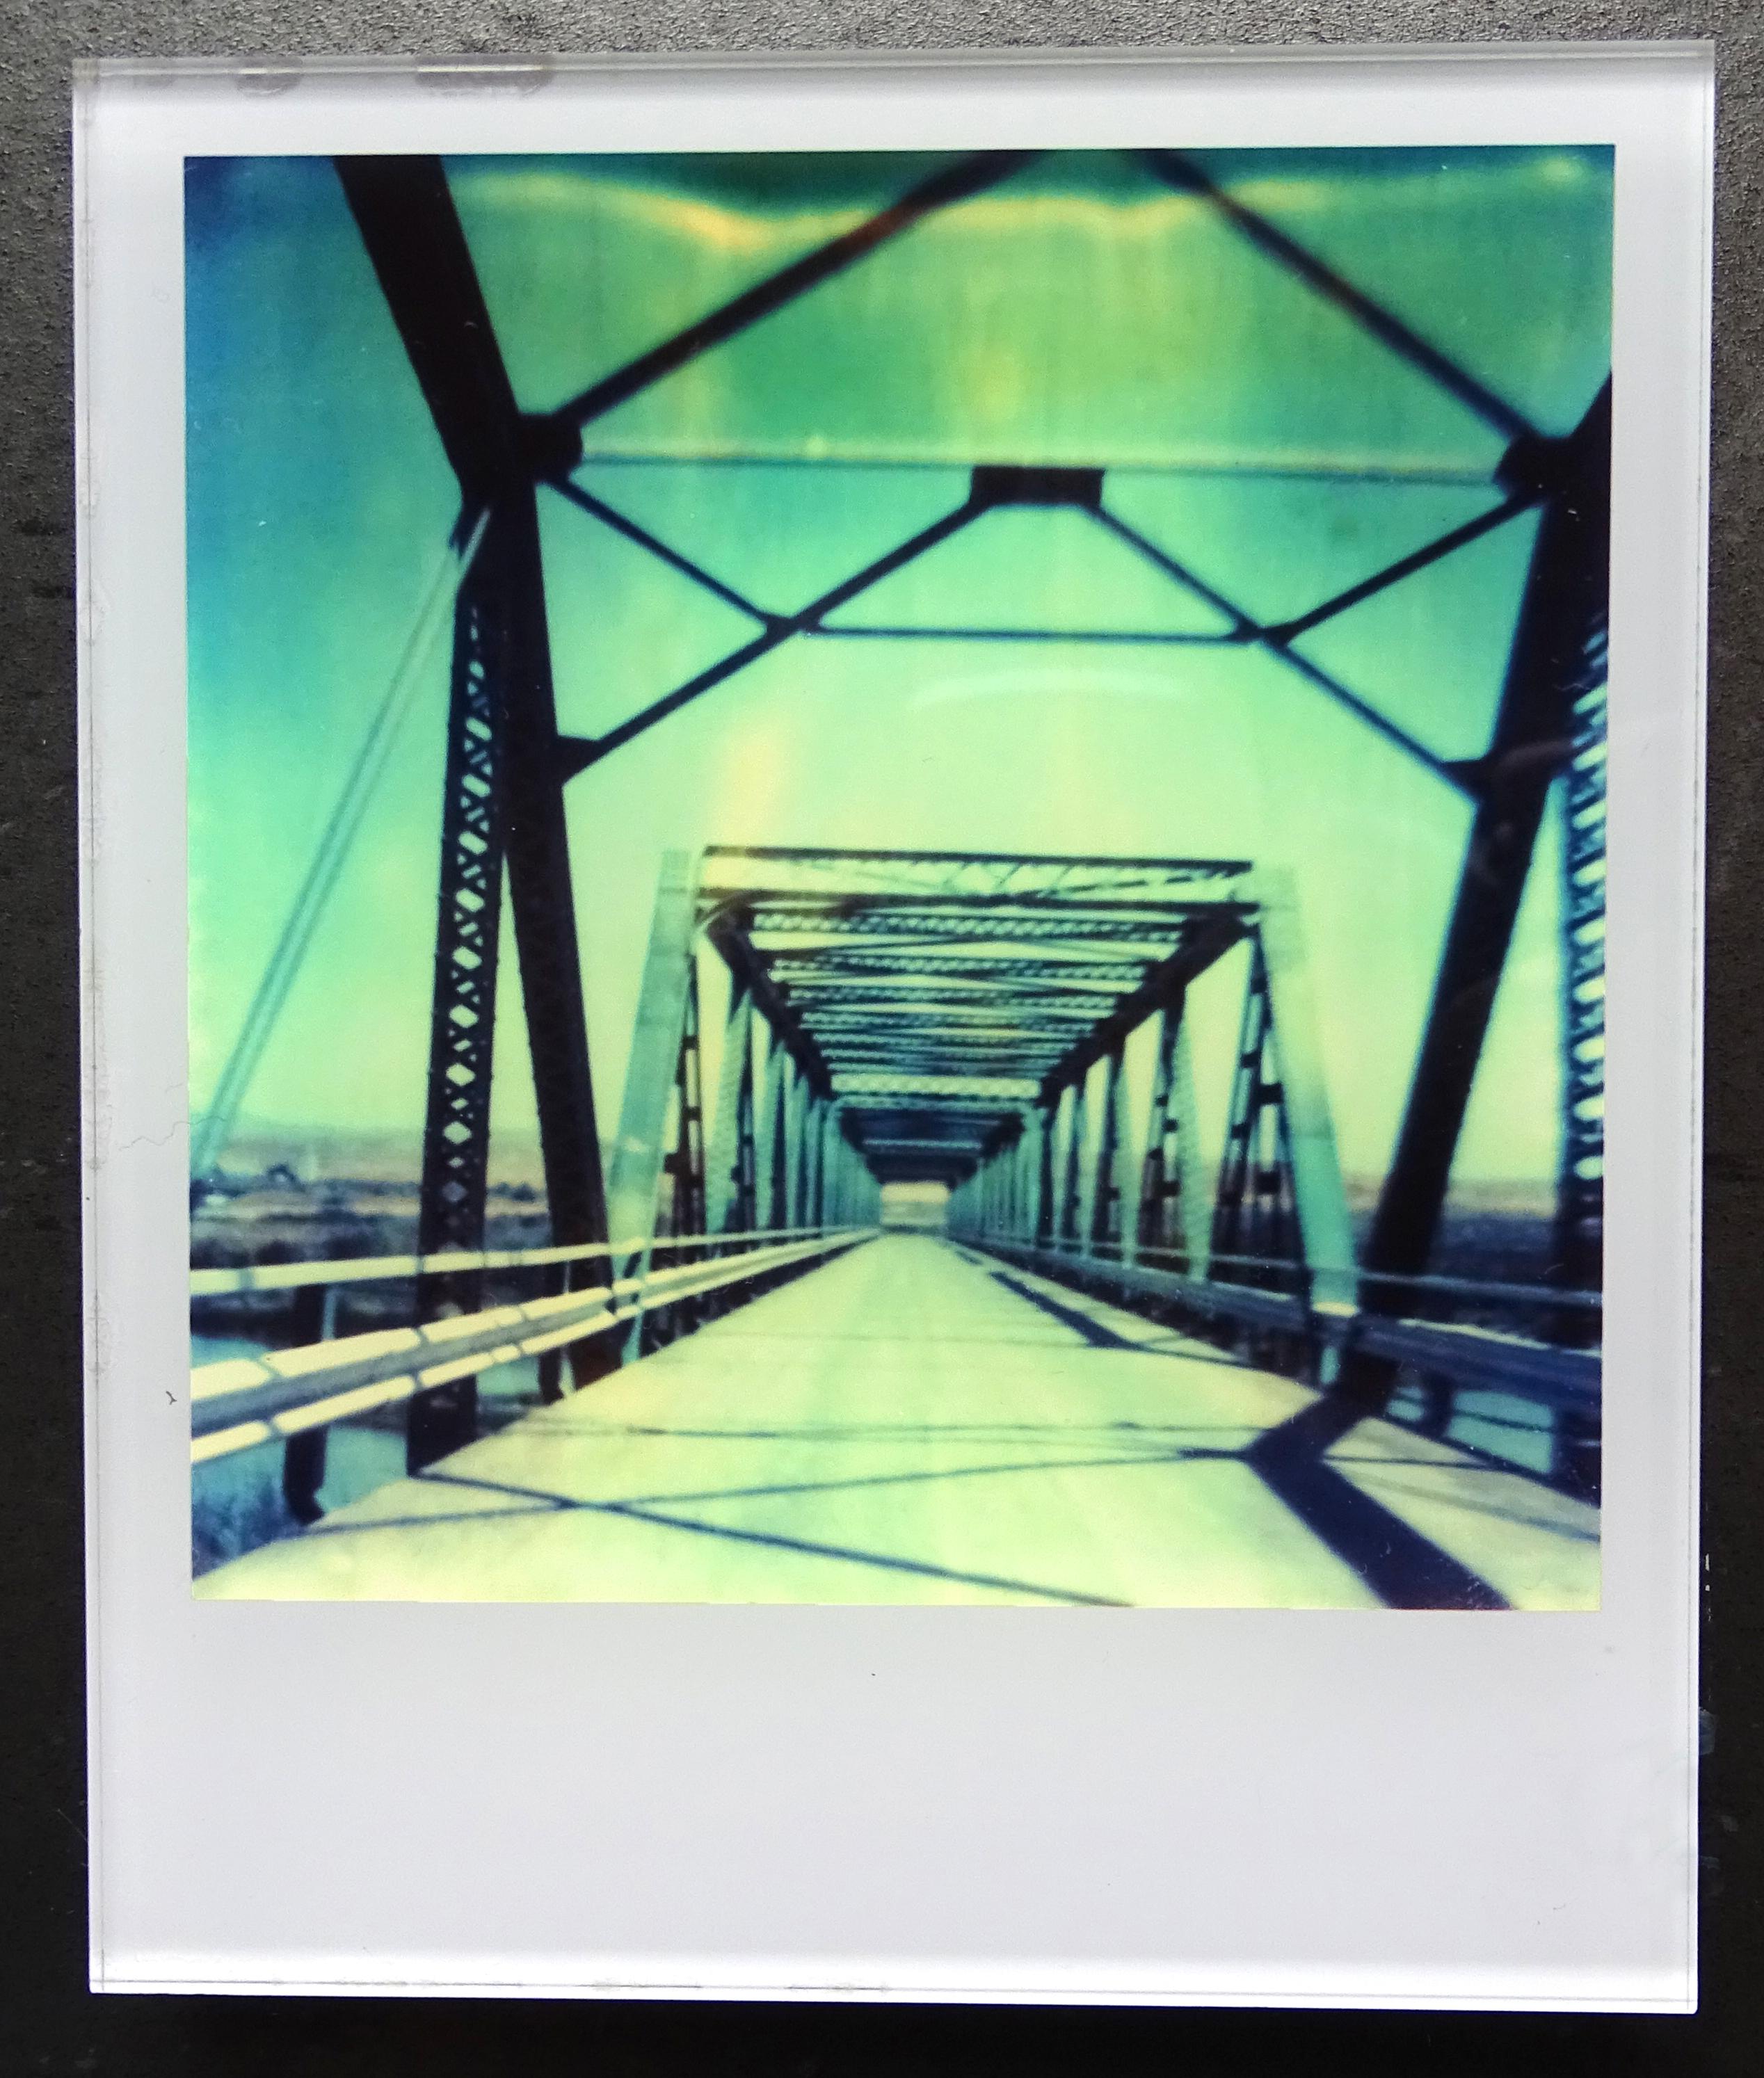 Stefanie Schneider's Minis
'Blue Bridge' (29 Palms, CA), 1999
signed and signature brand on verso
Lambda digital Color Photographs based on a Polaroid

Polaroid sized open Editions 1999-2013
10.7 x 8.8cm (Image 7.9x7.7cm)
mounted: sandwiched in